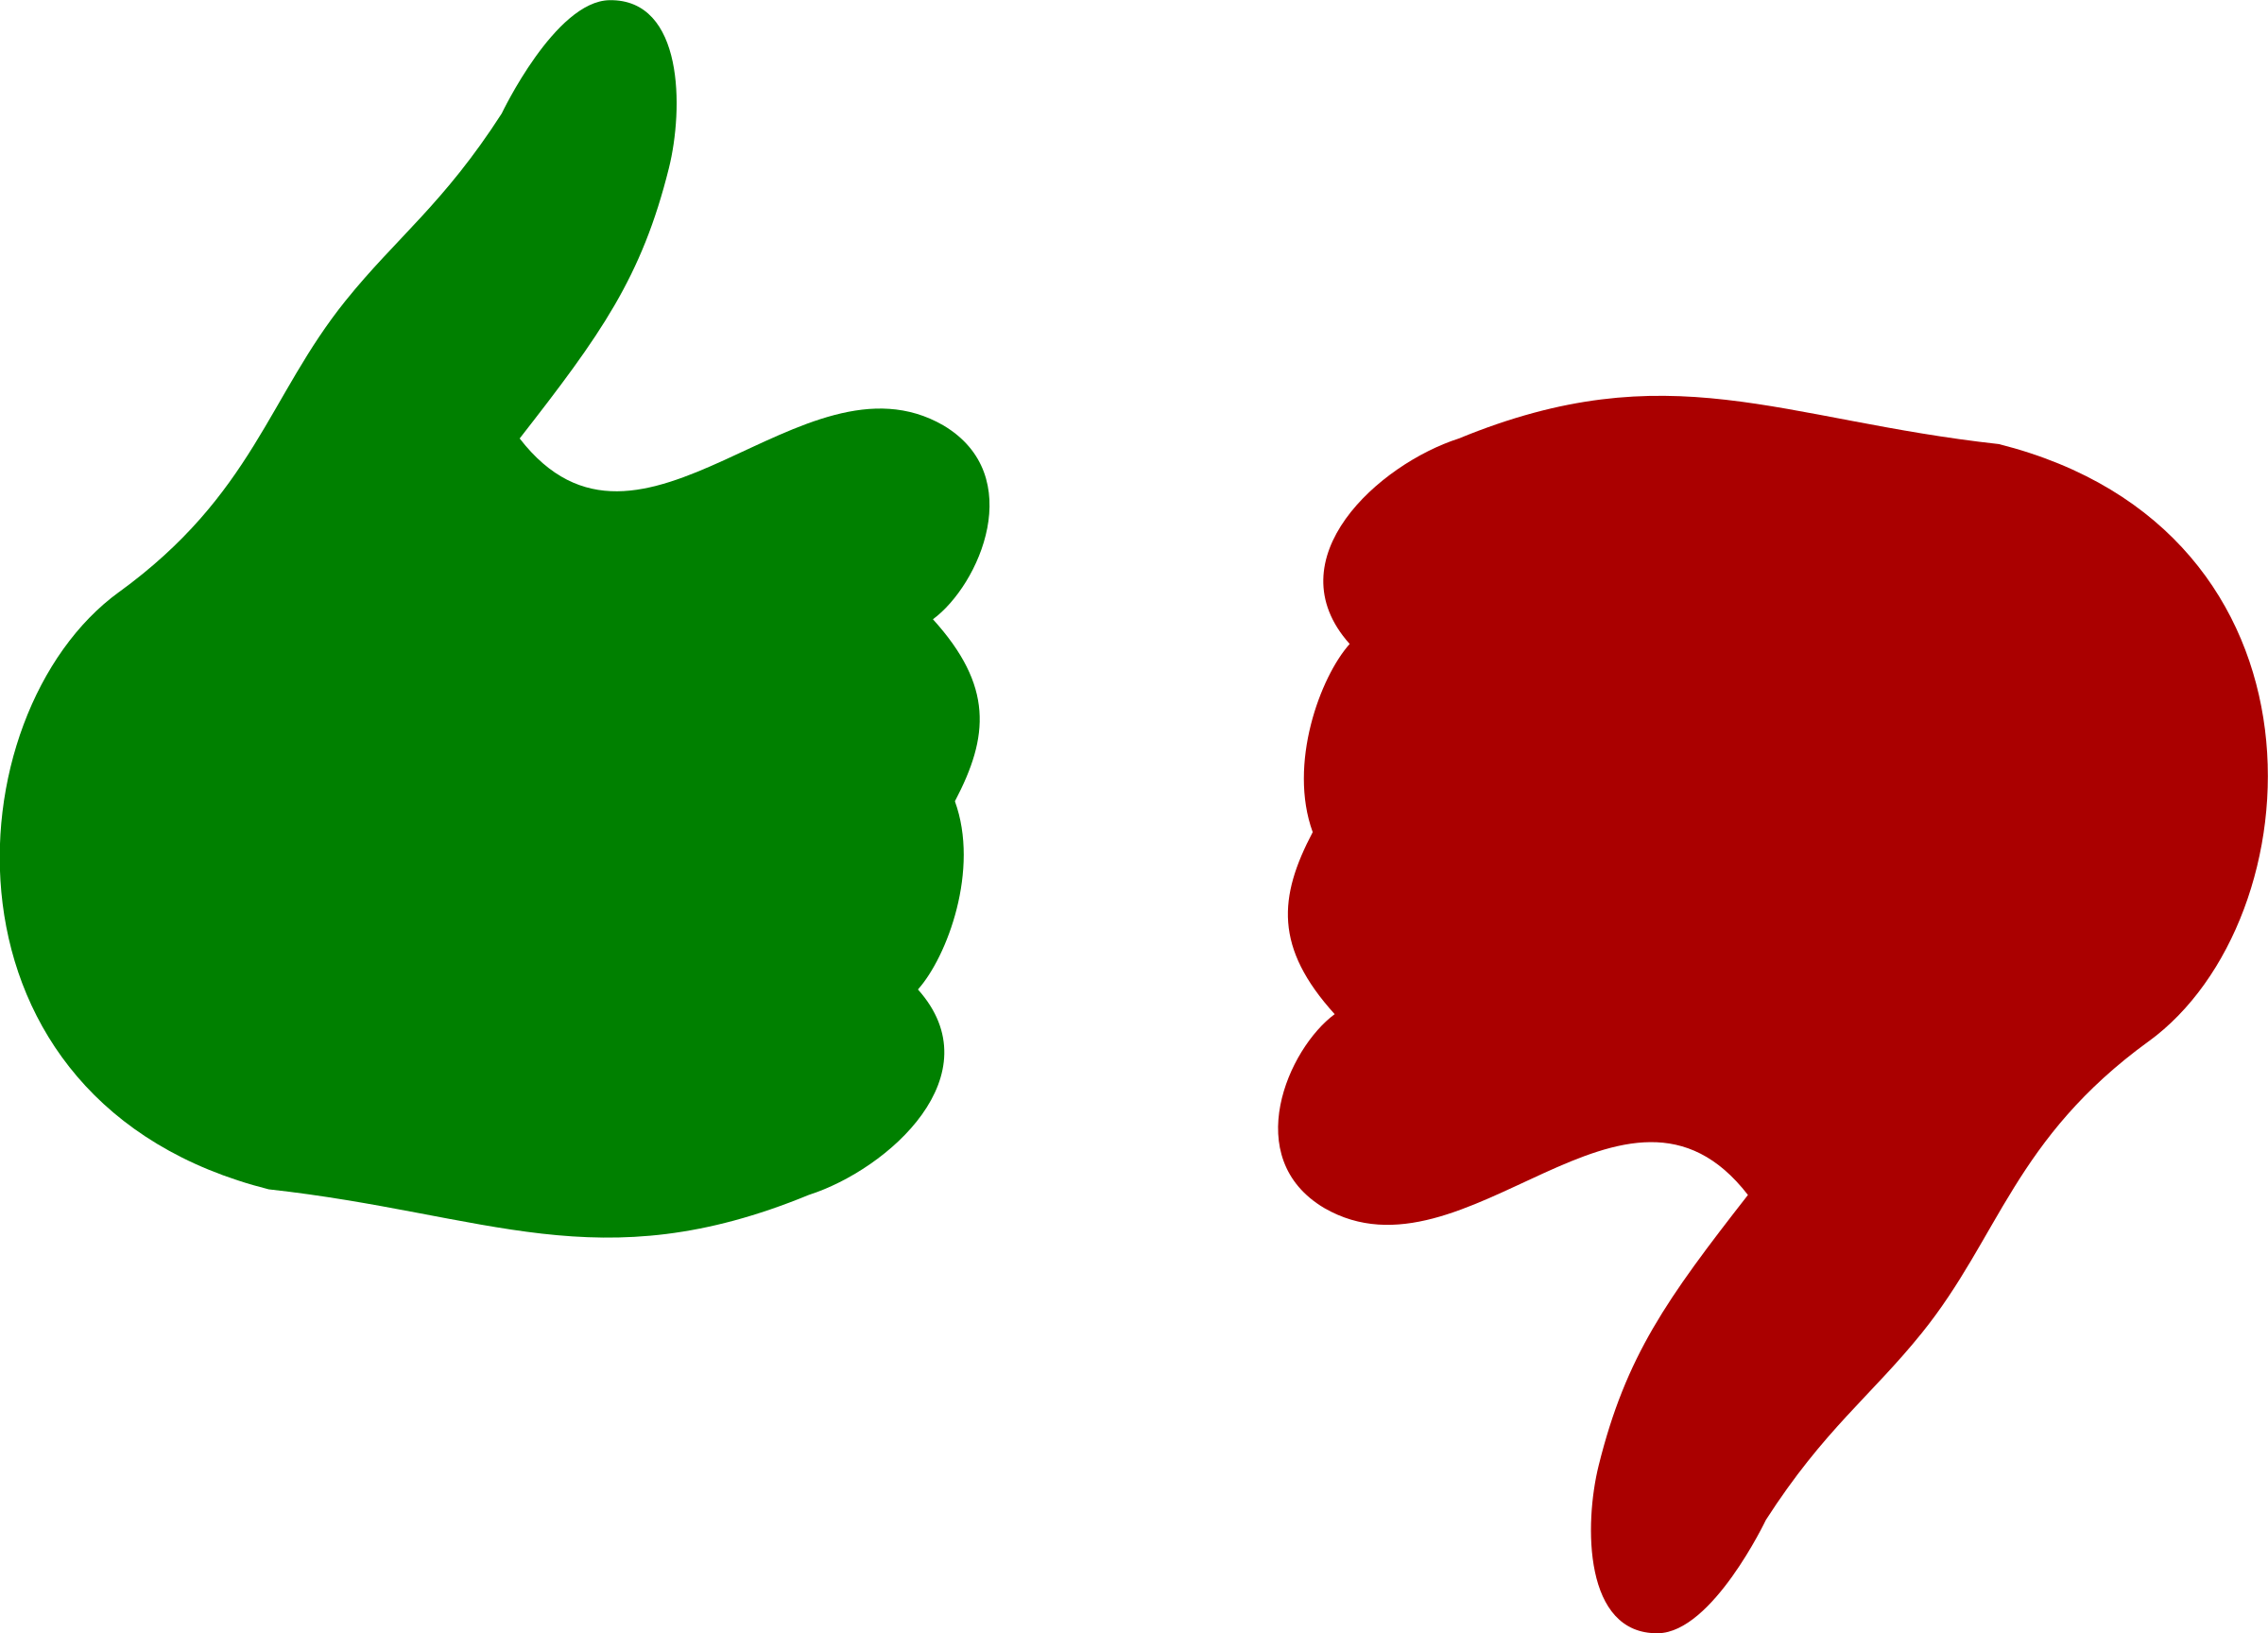 Red Thumb Down Png Image Clipart Best